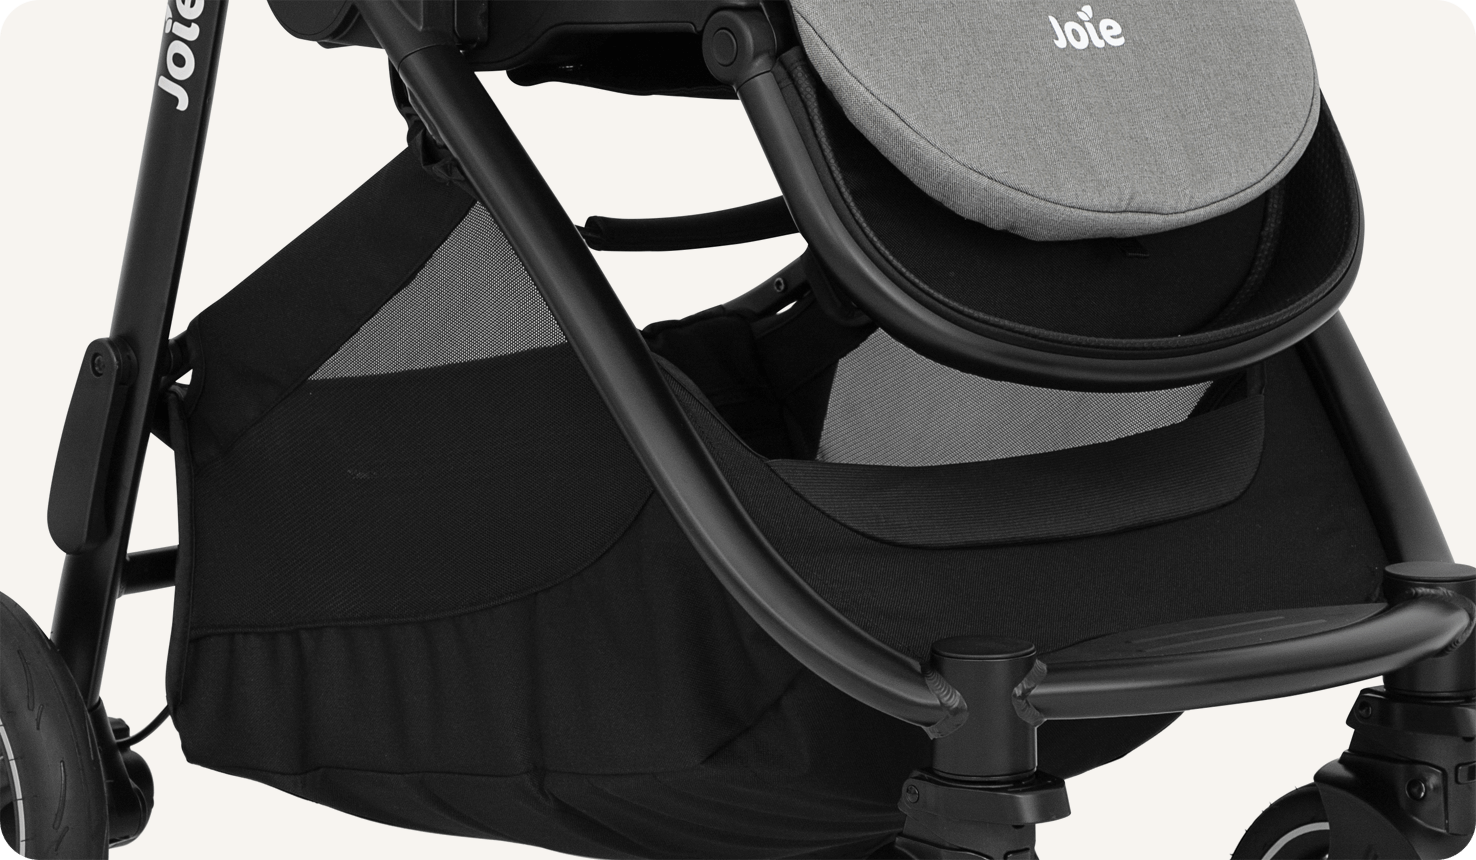 Zoomed in view of the storage basket on a Joie versatrax pram.
